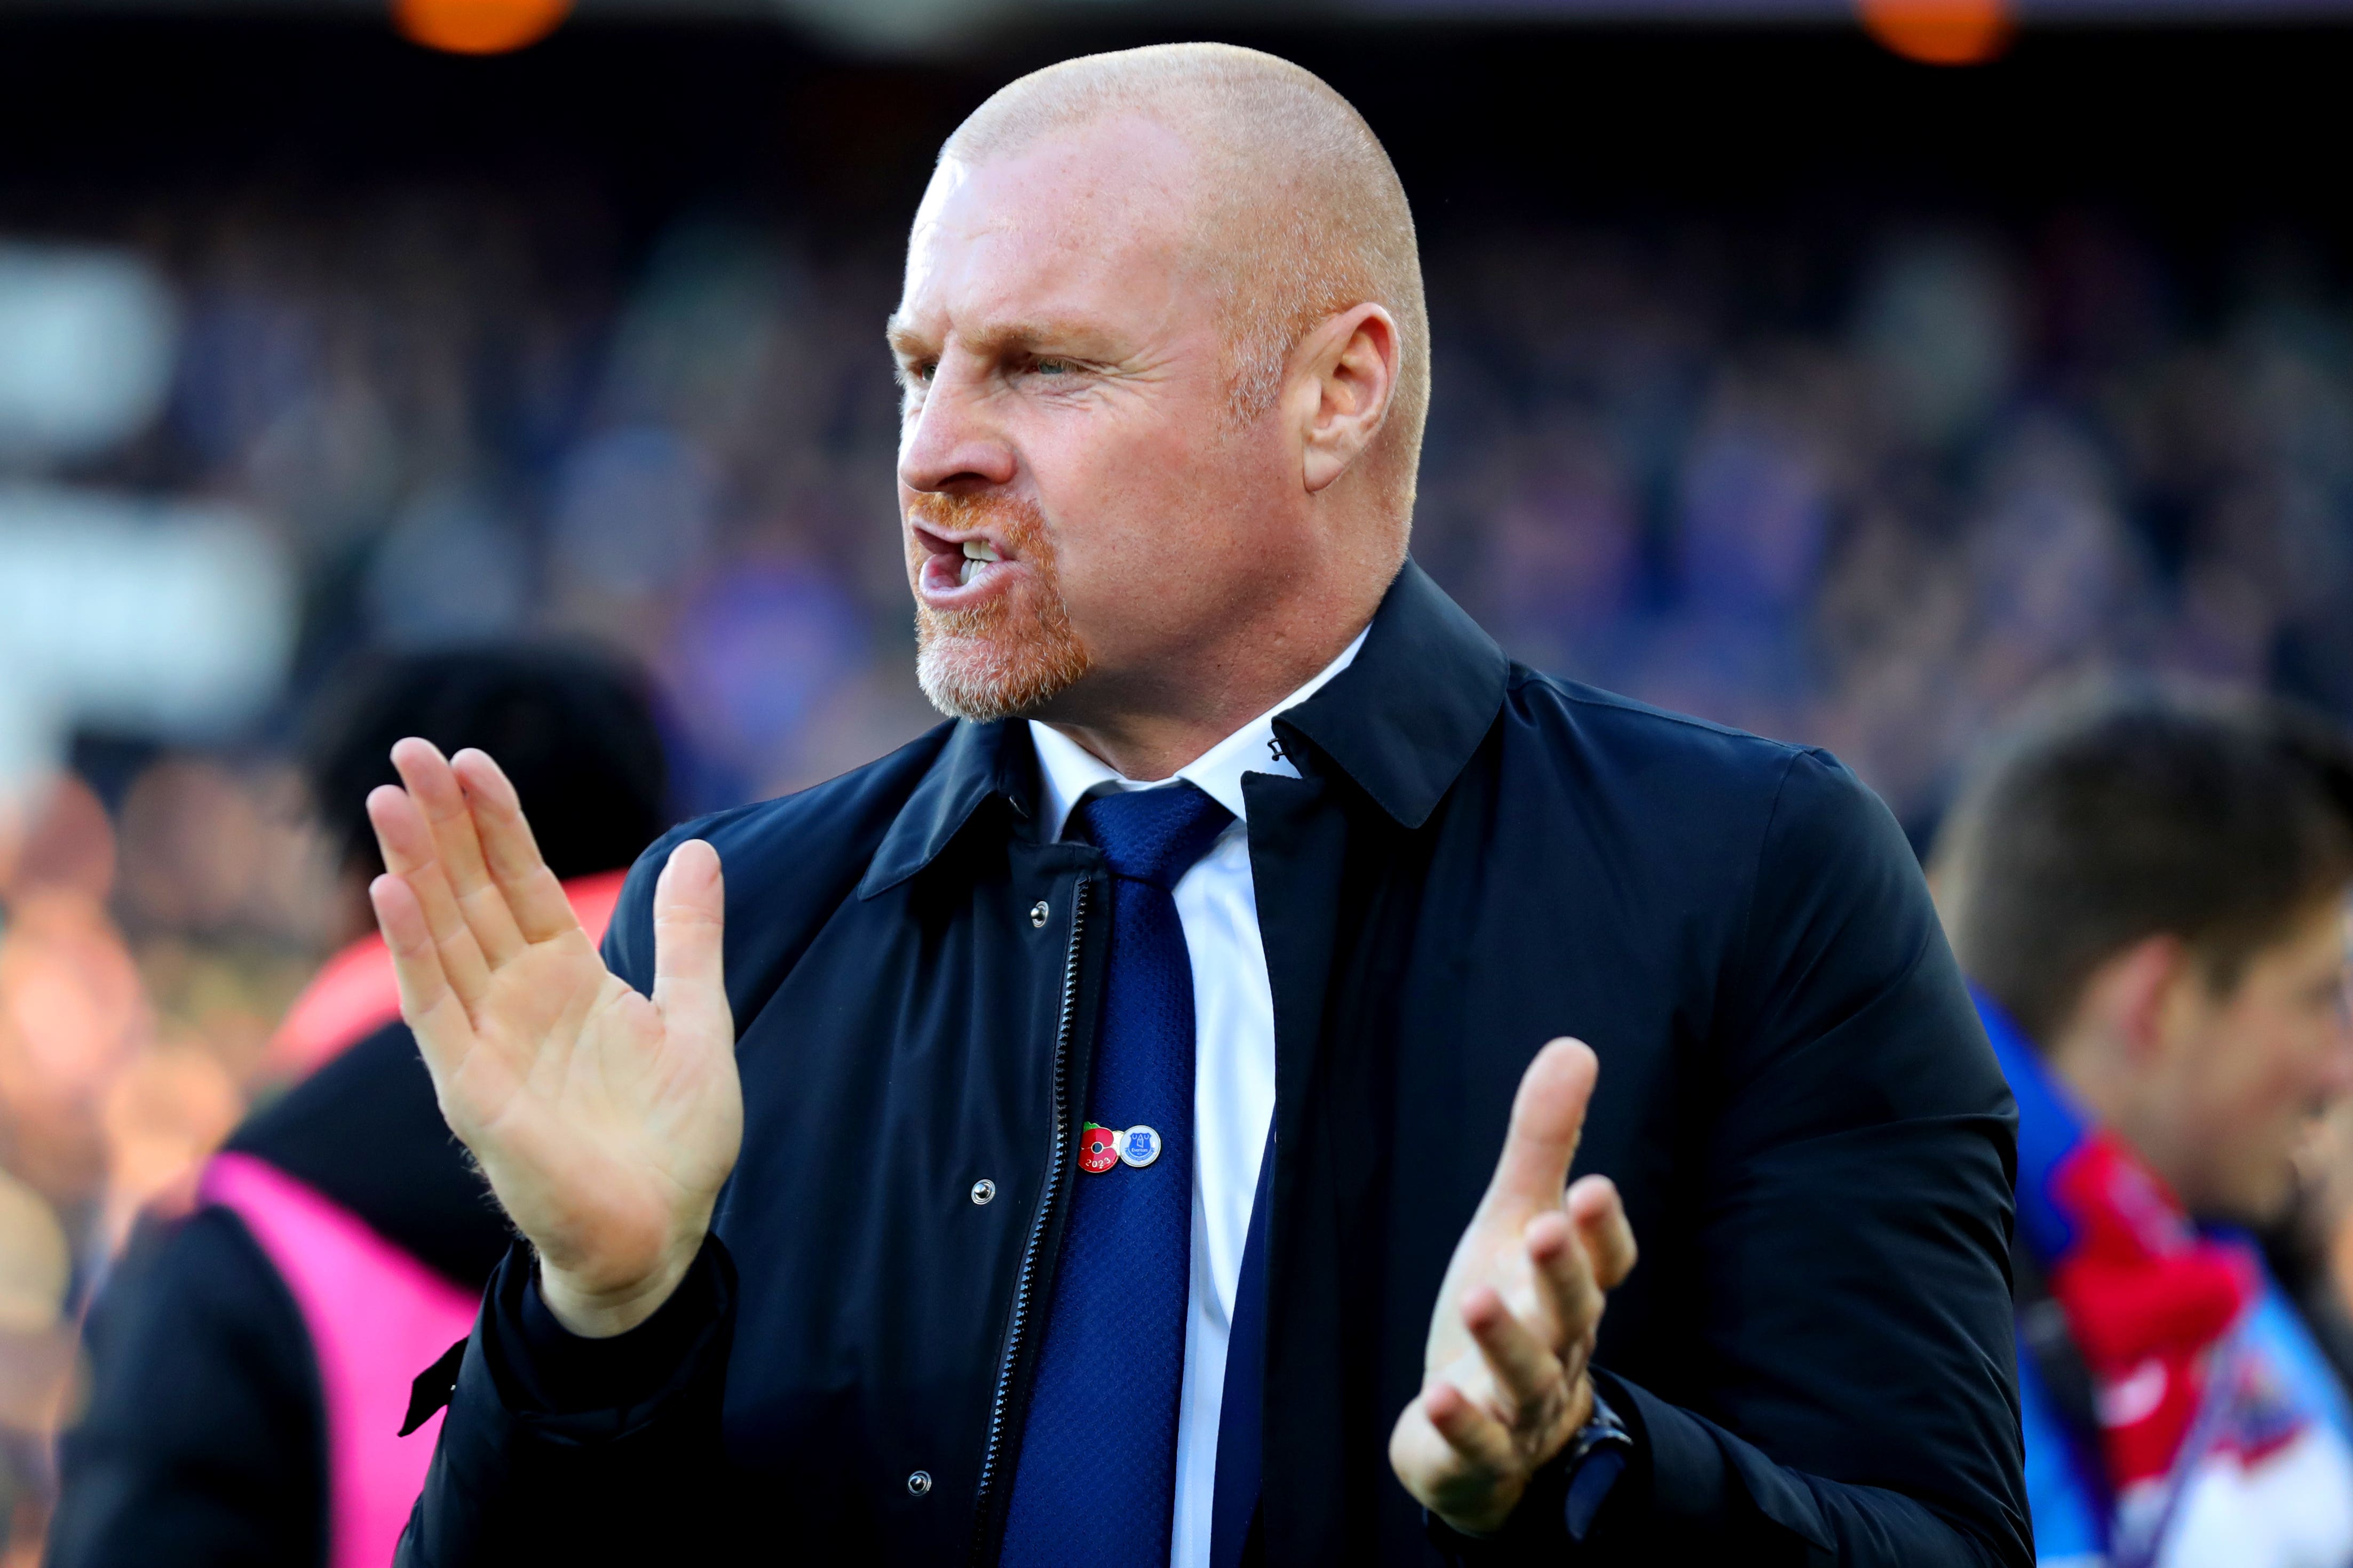 Sean Dyche now faces a tougher job to keep Everton up